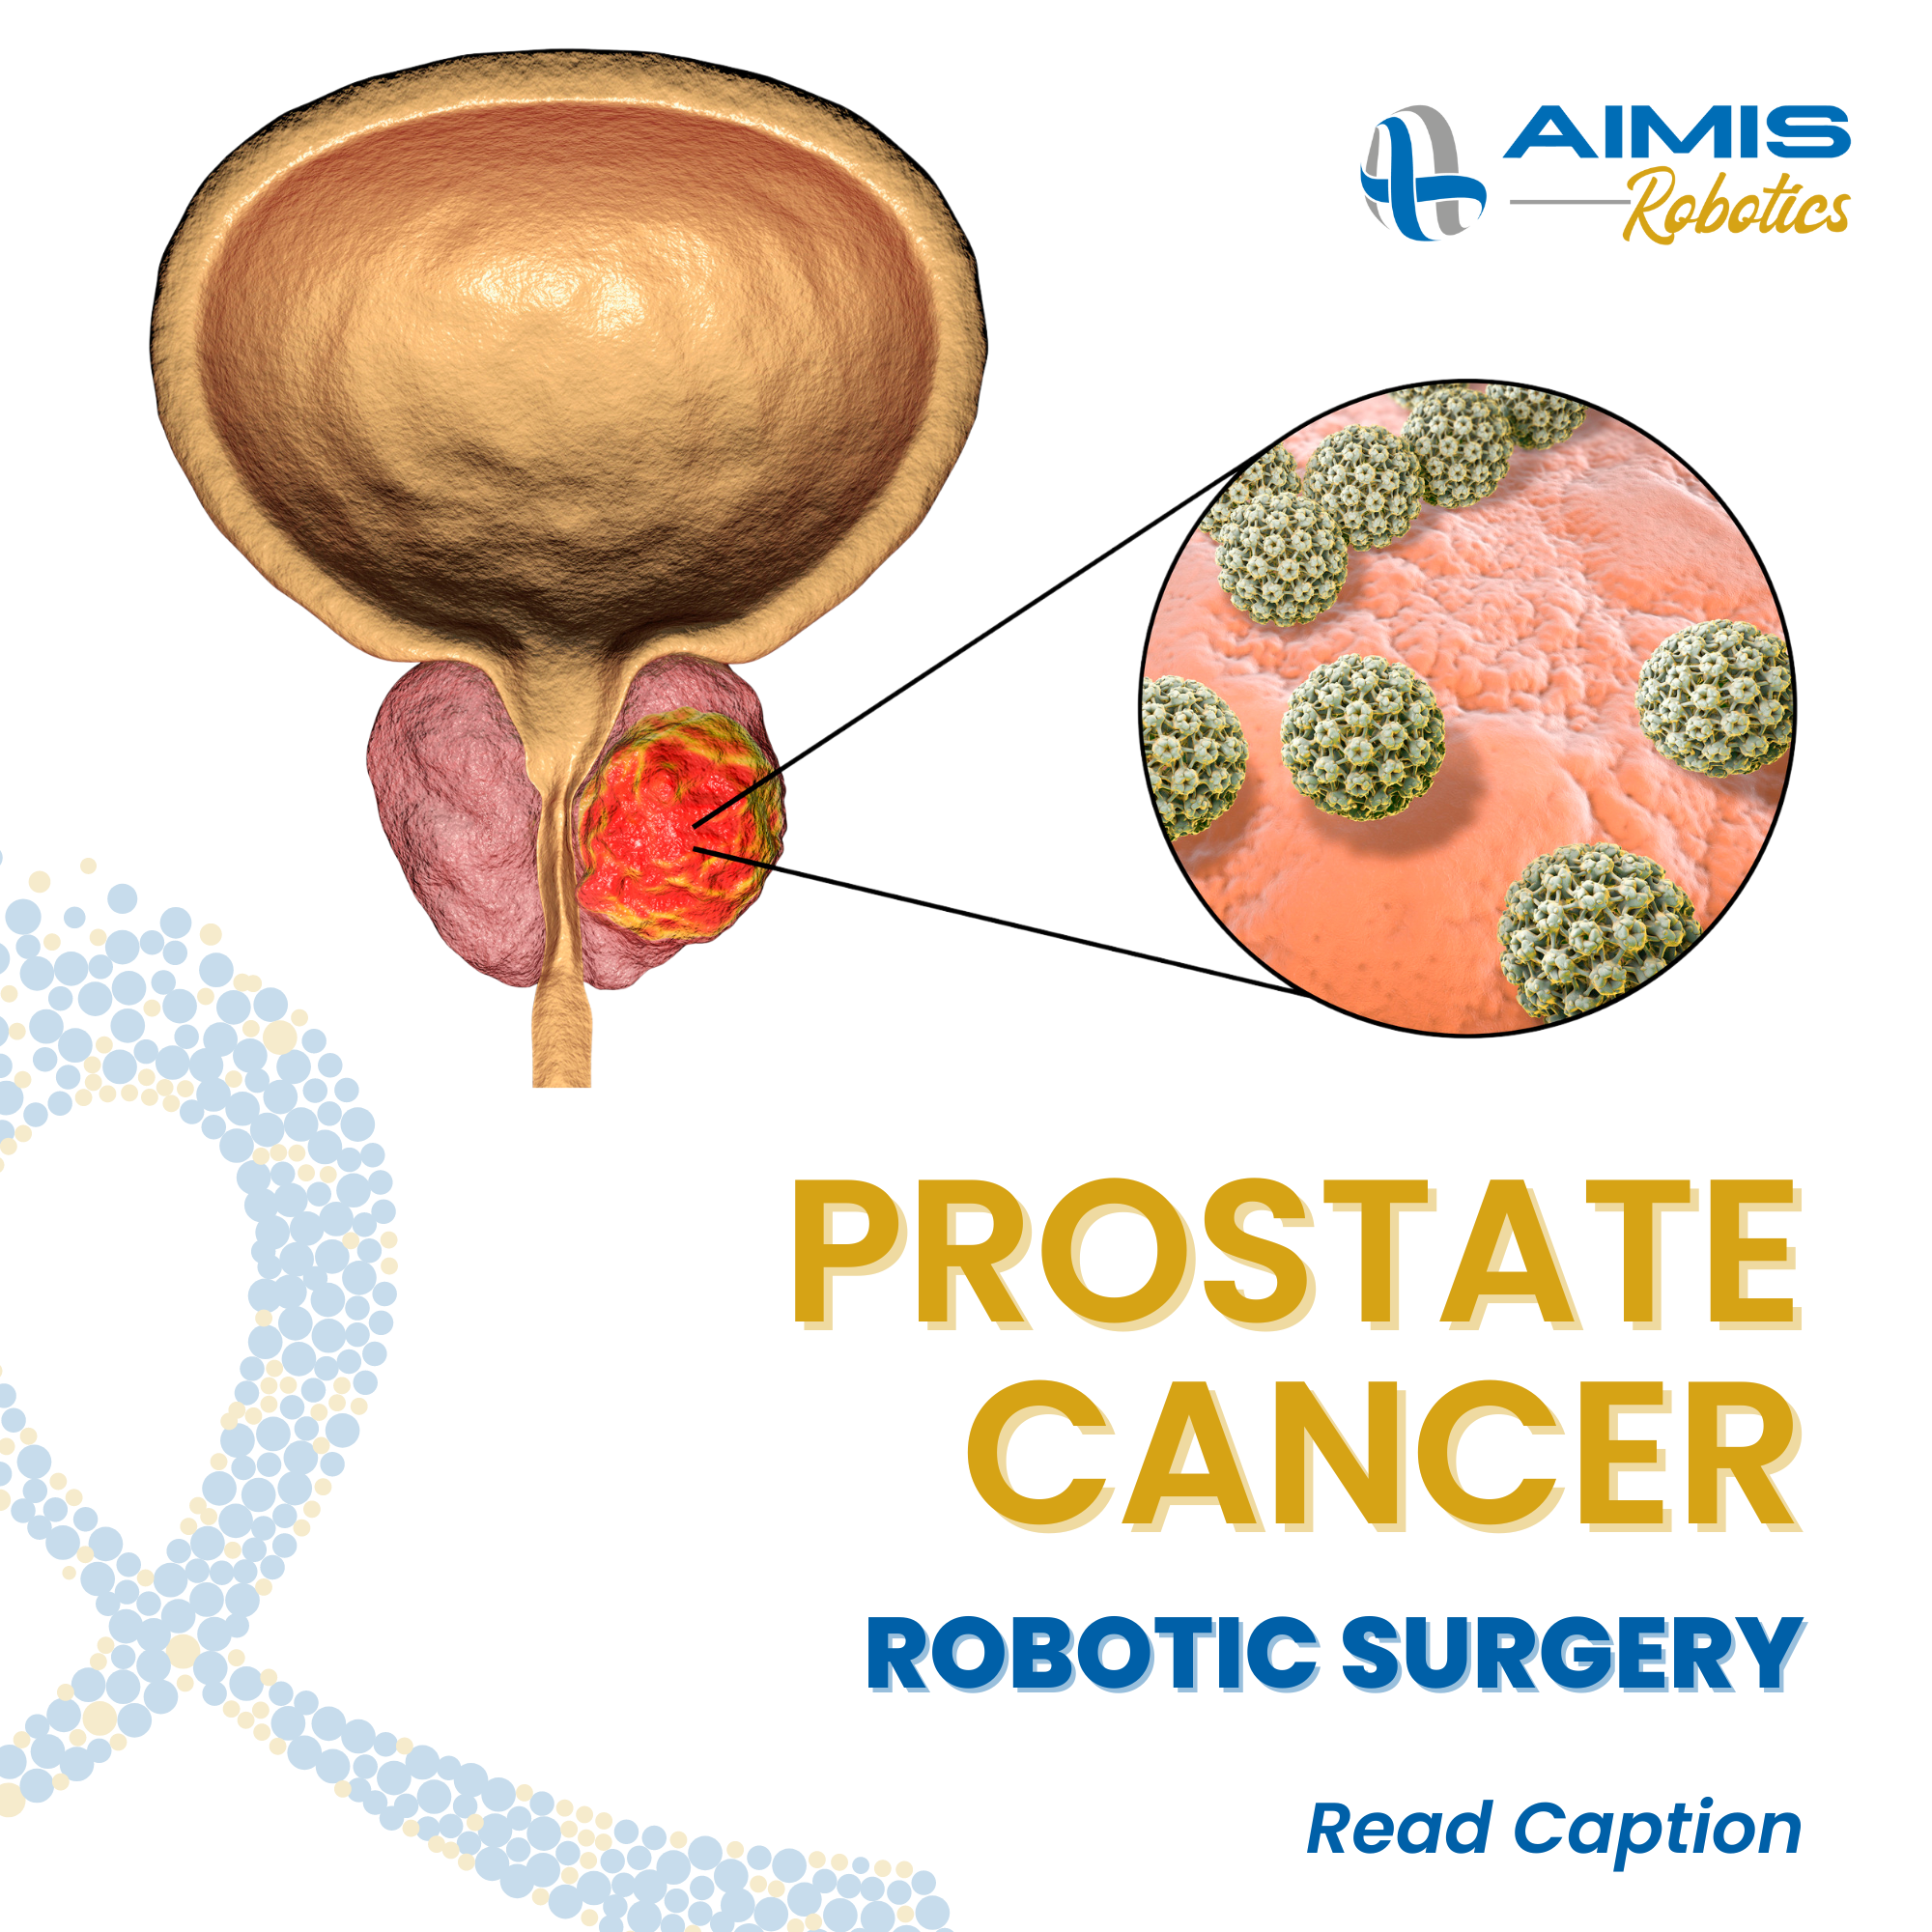 Robotic surgery for Prostate Cancer